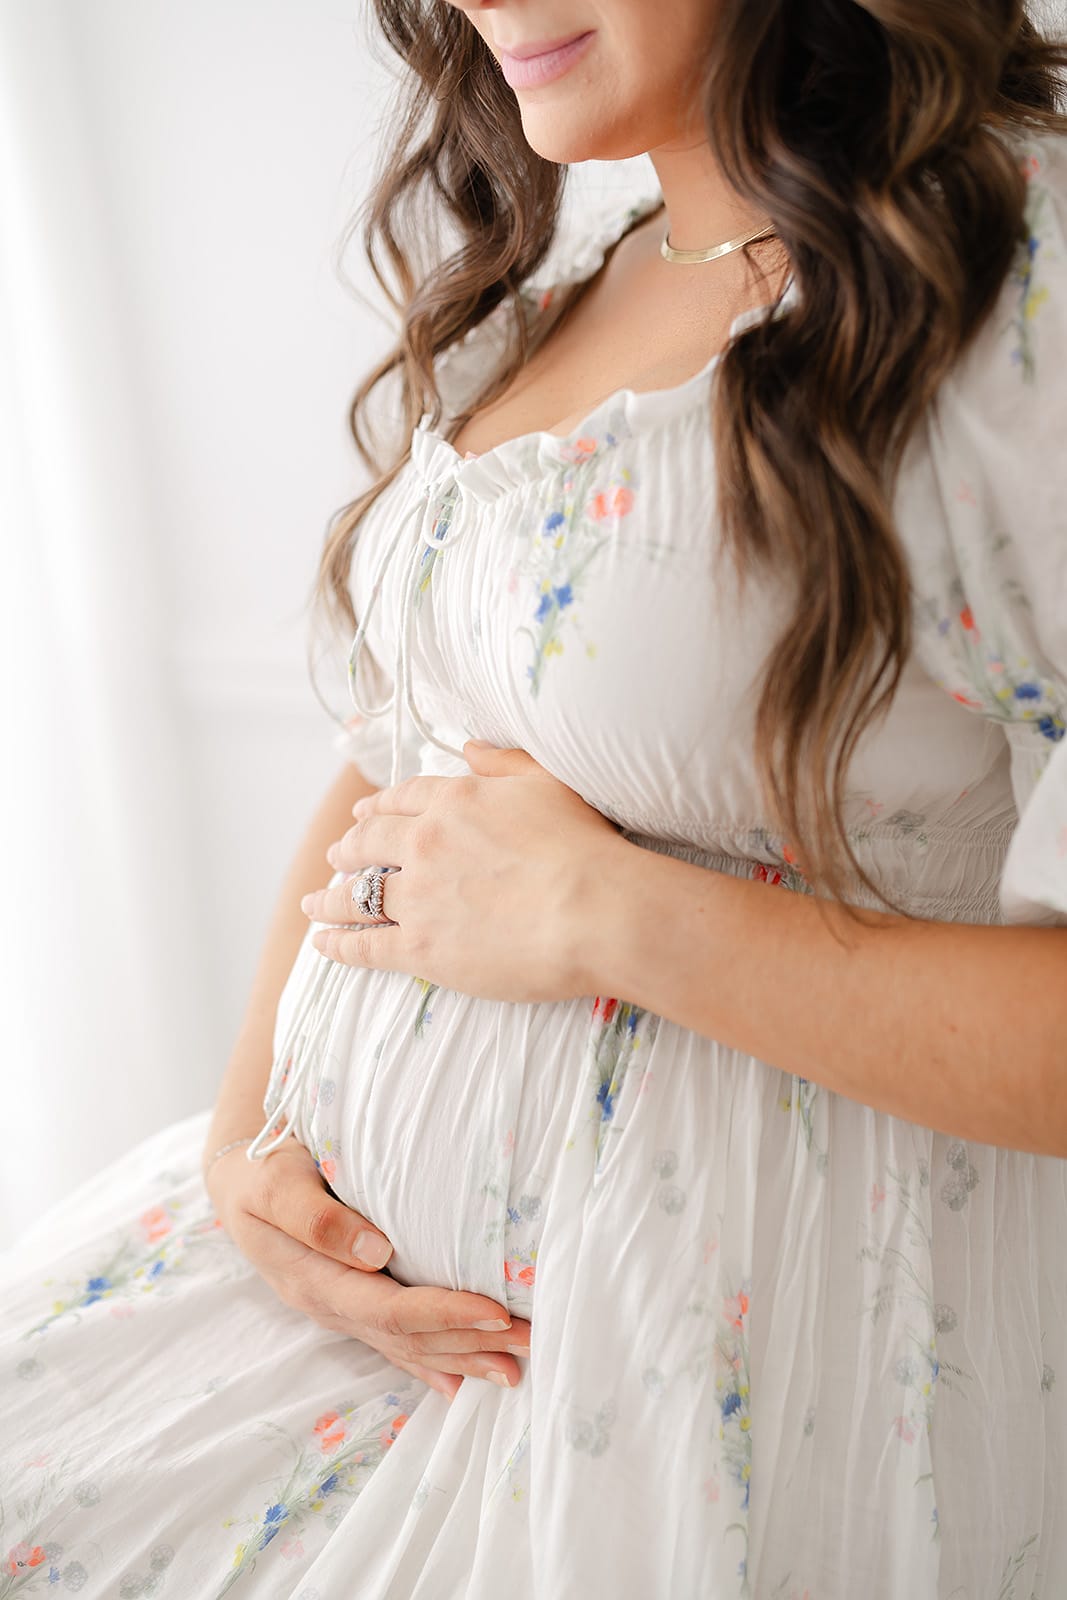 A Pensacola maternity photographer captures a serene moment as a pregnant woman in a white dress lovingly cradles her belly.